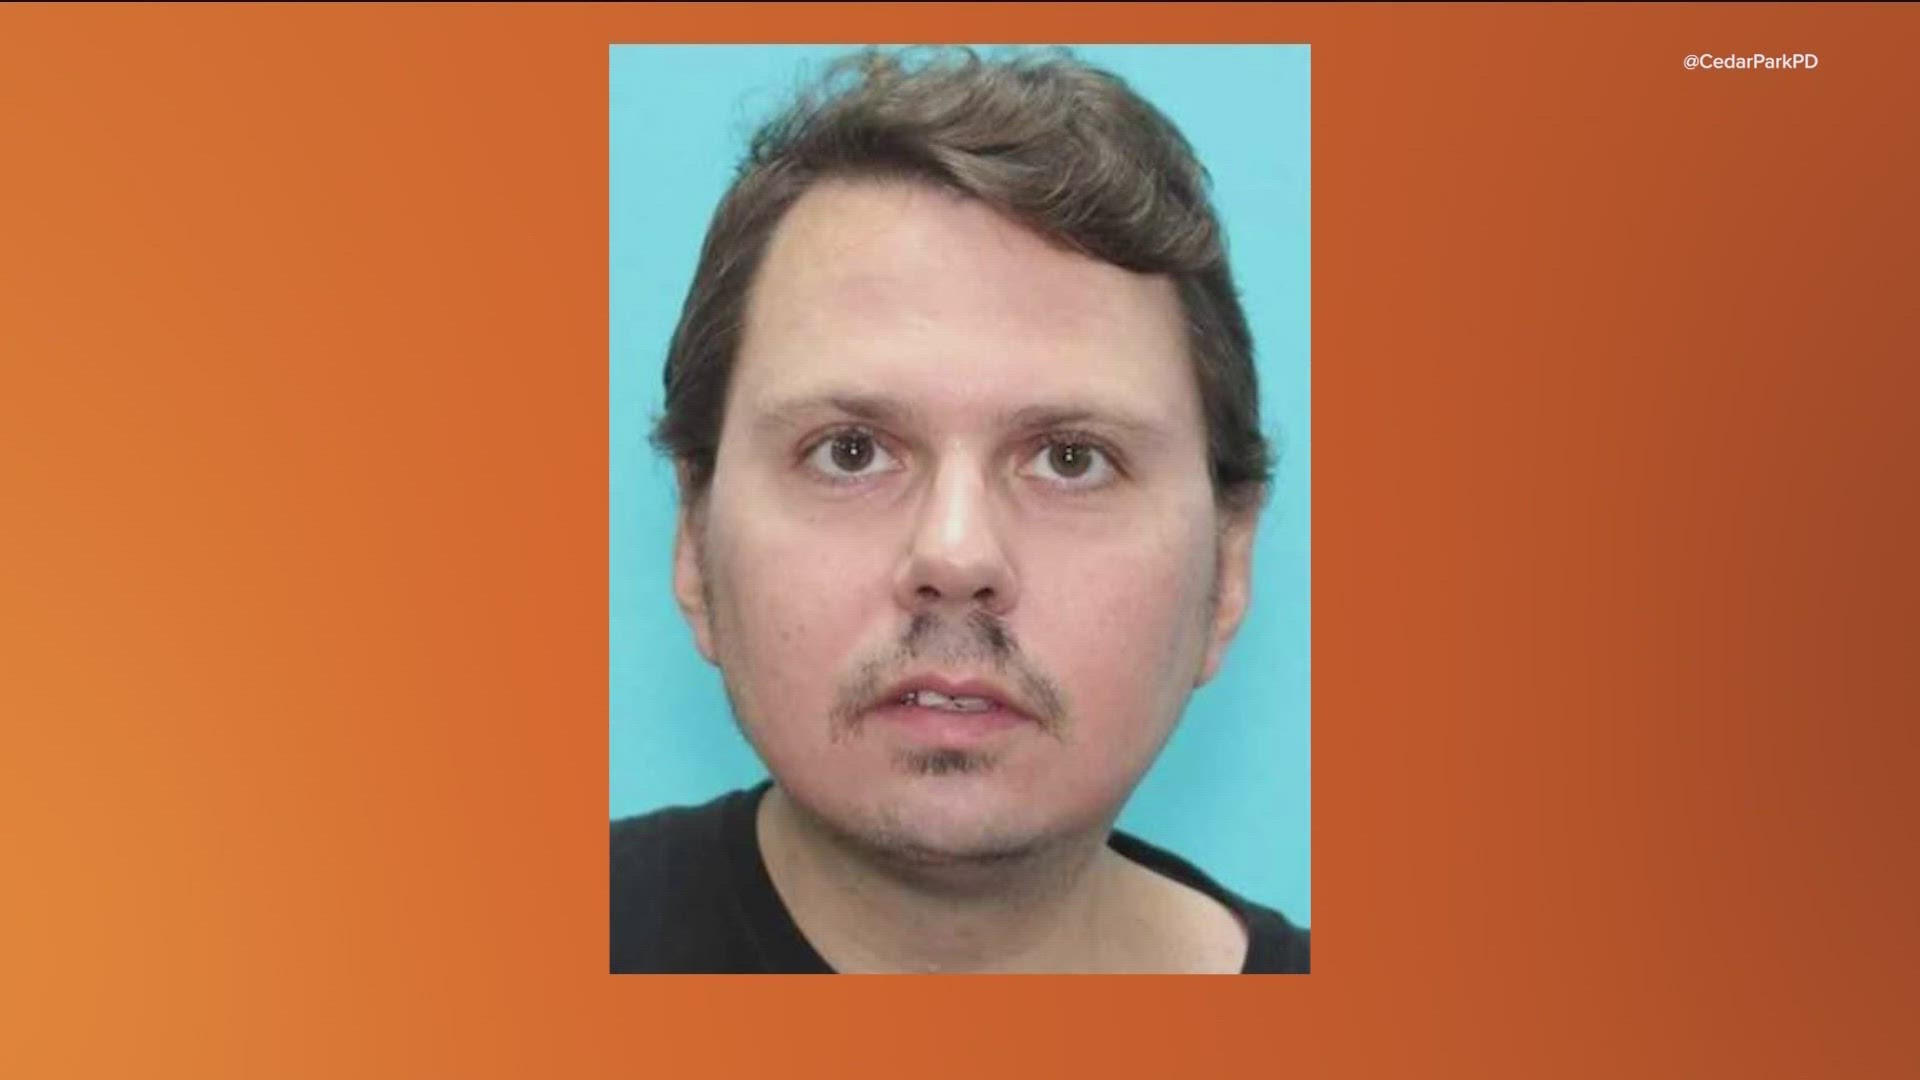 Cedar Park police are looking for a man missing out of the Lakeline area.